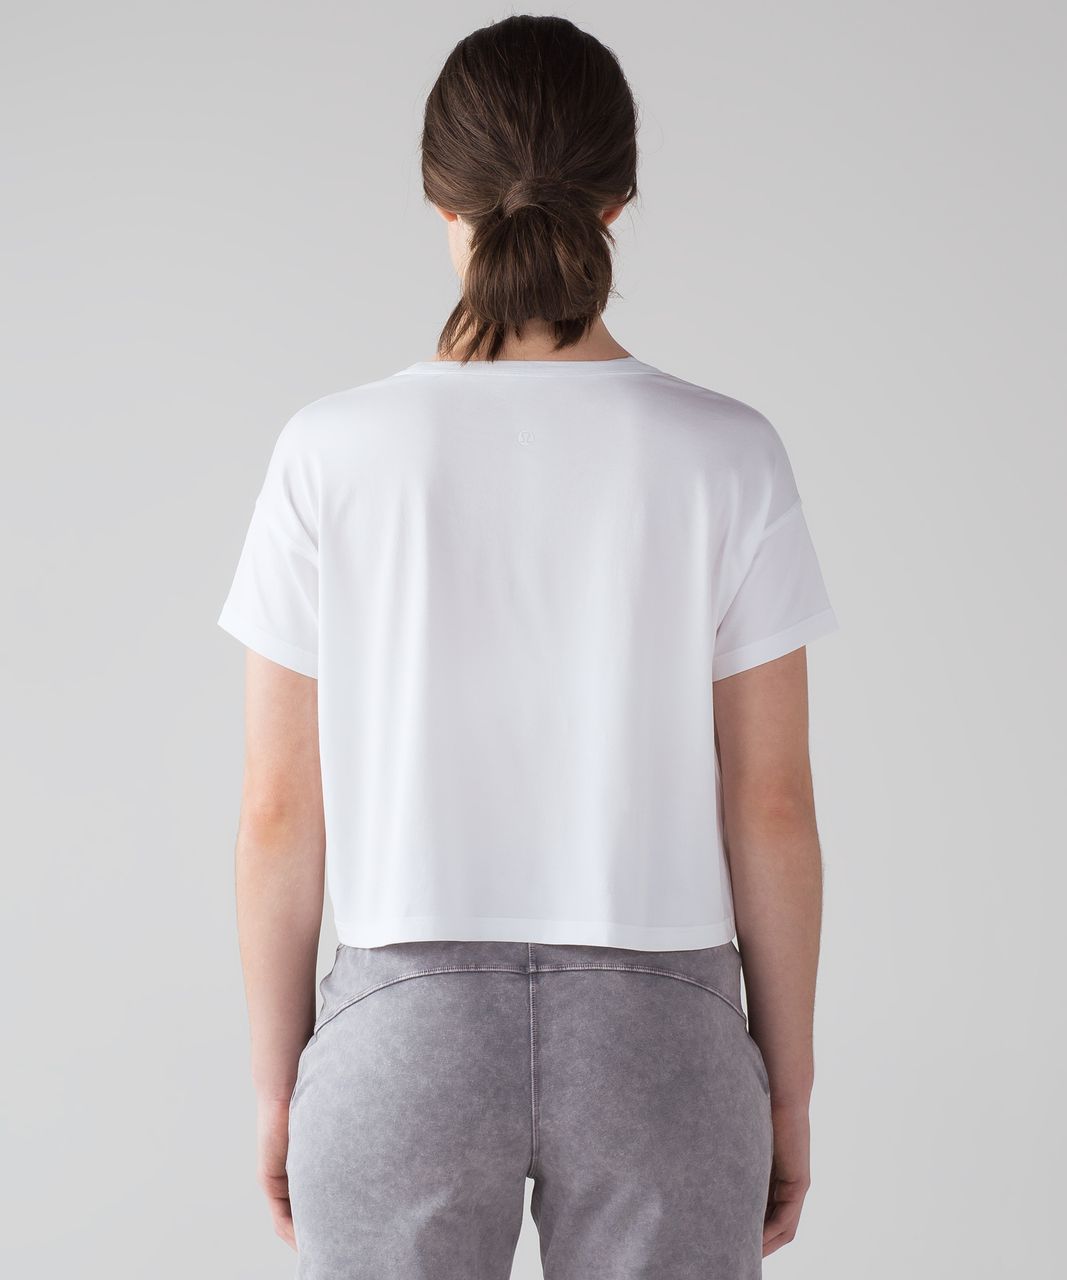 Lululemon Cates Tee - White (First Release)